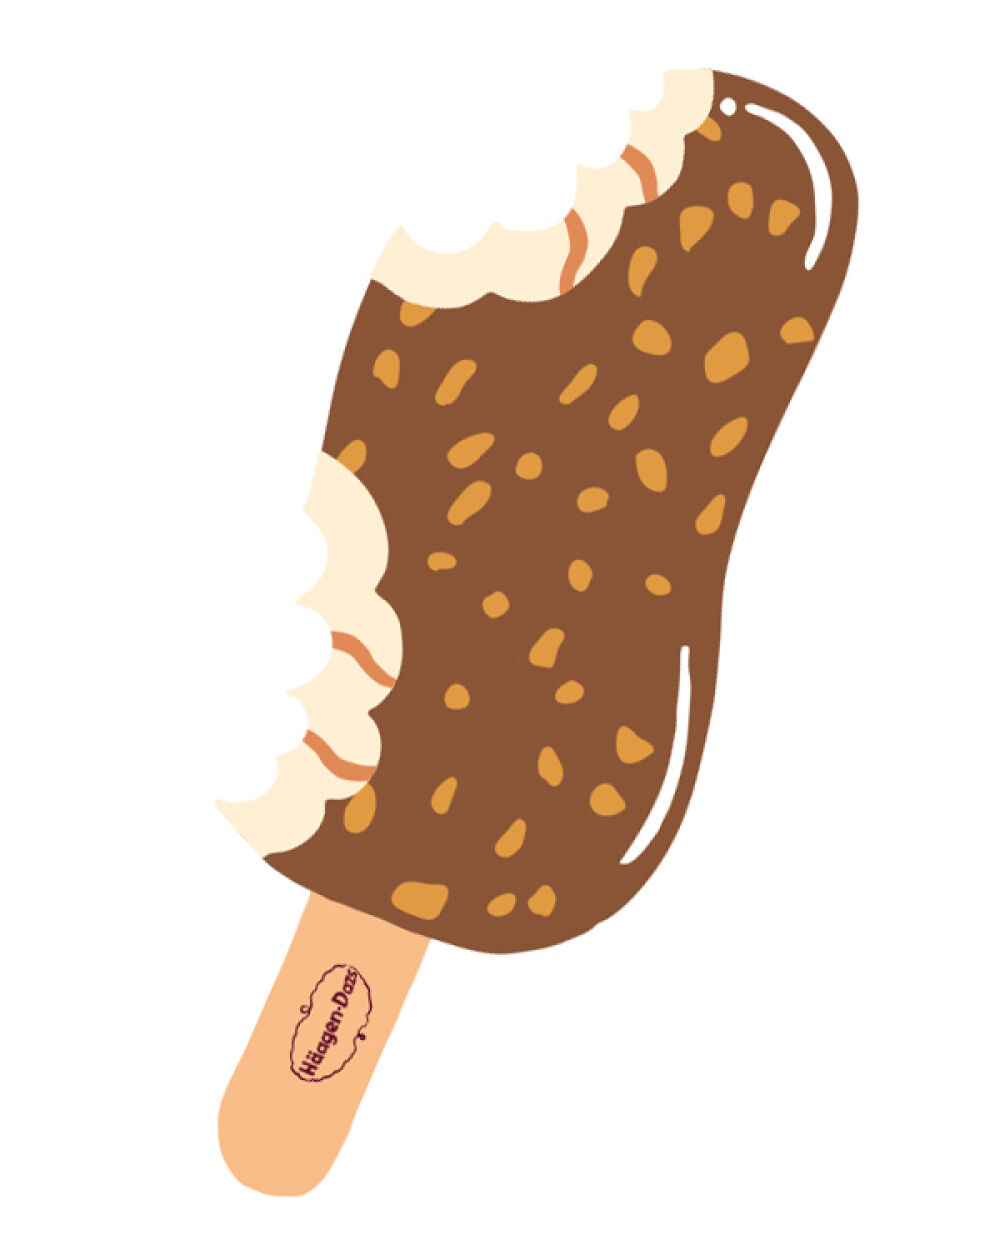 Illustrated animation by Erica Jacobson for Häagen Dazs advertising campaign.